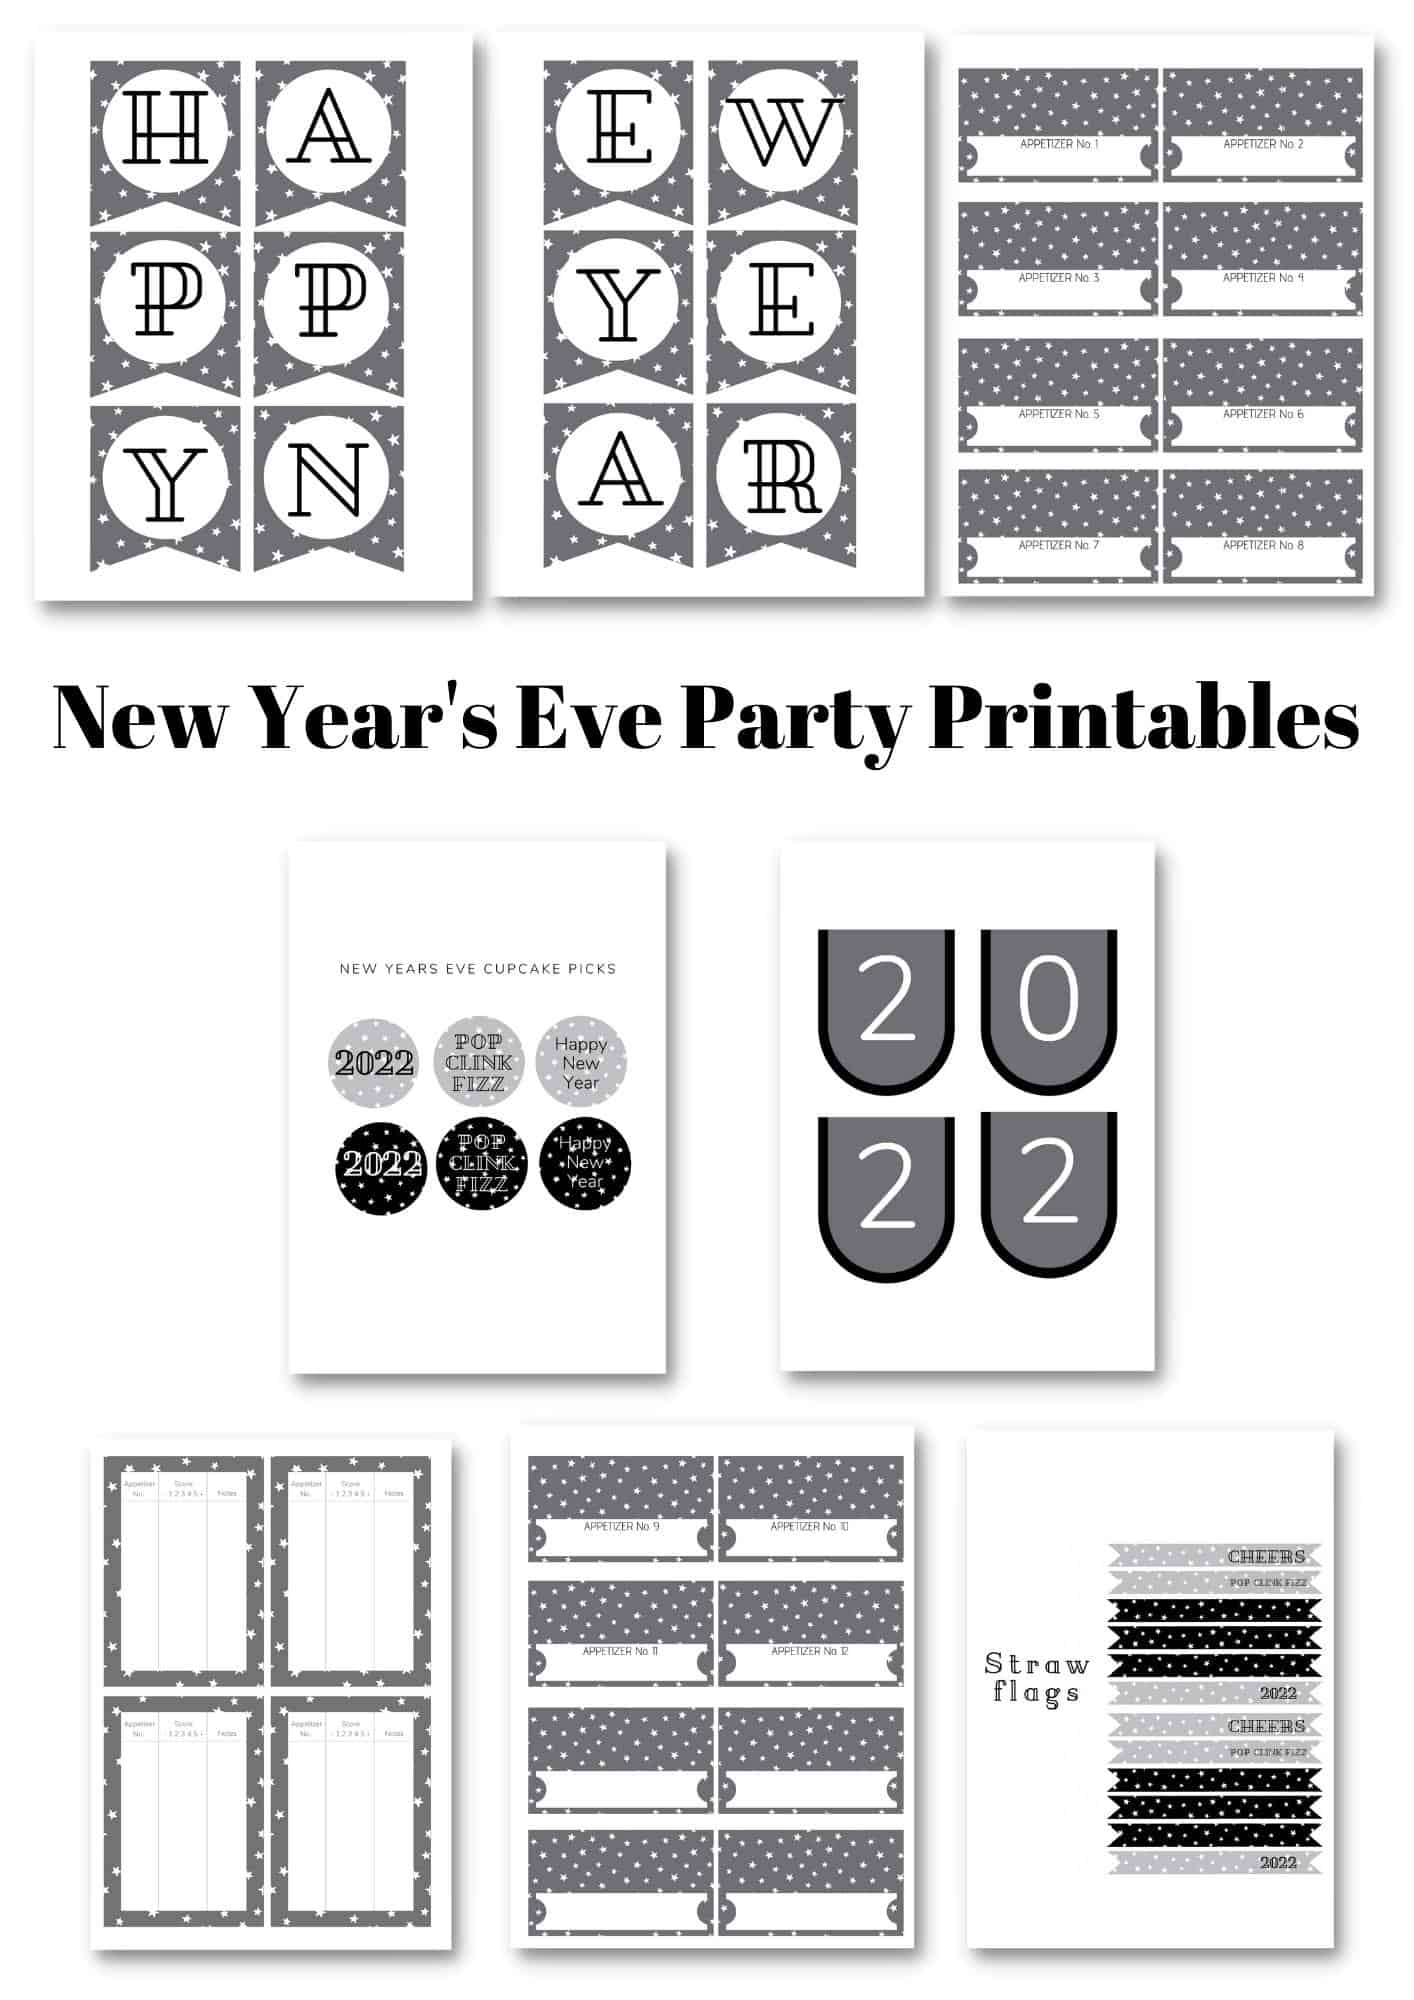 New Year's Eve Printables